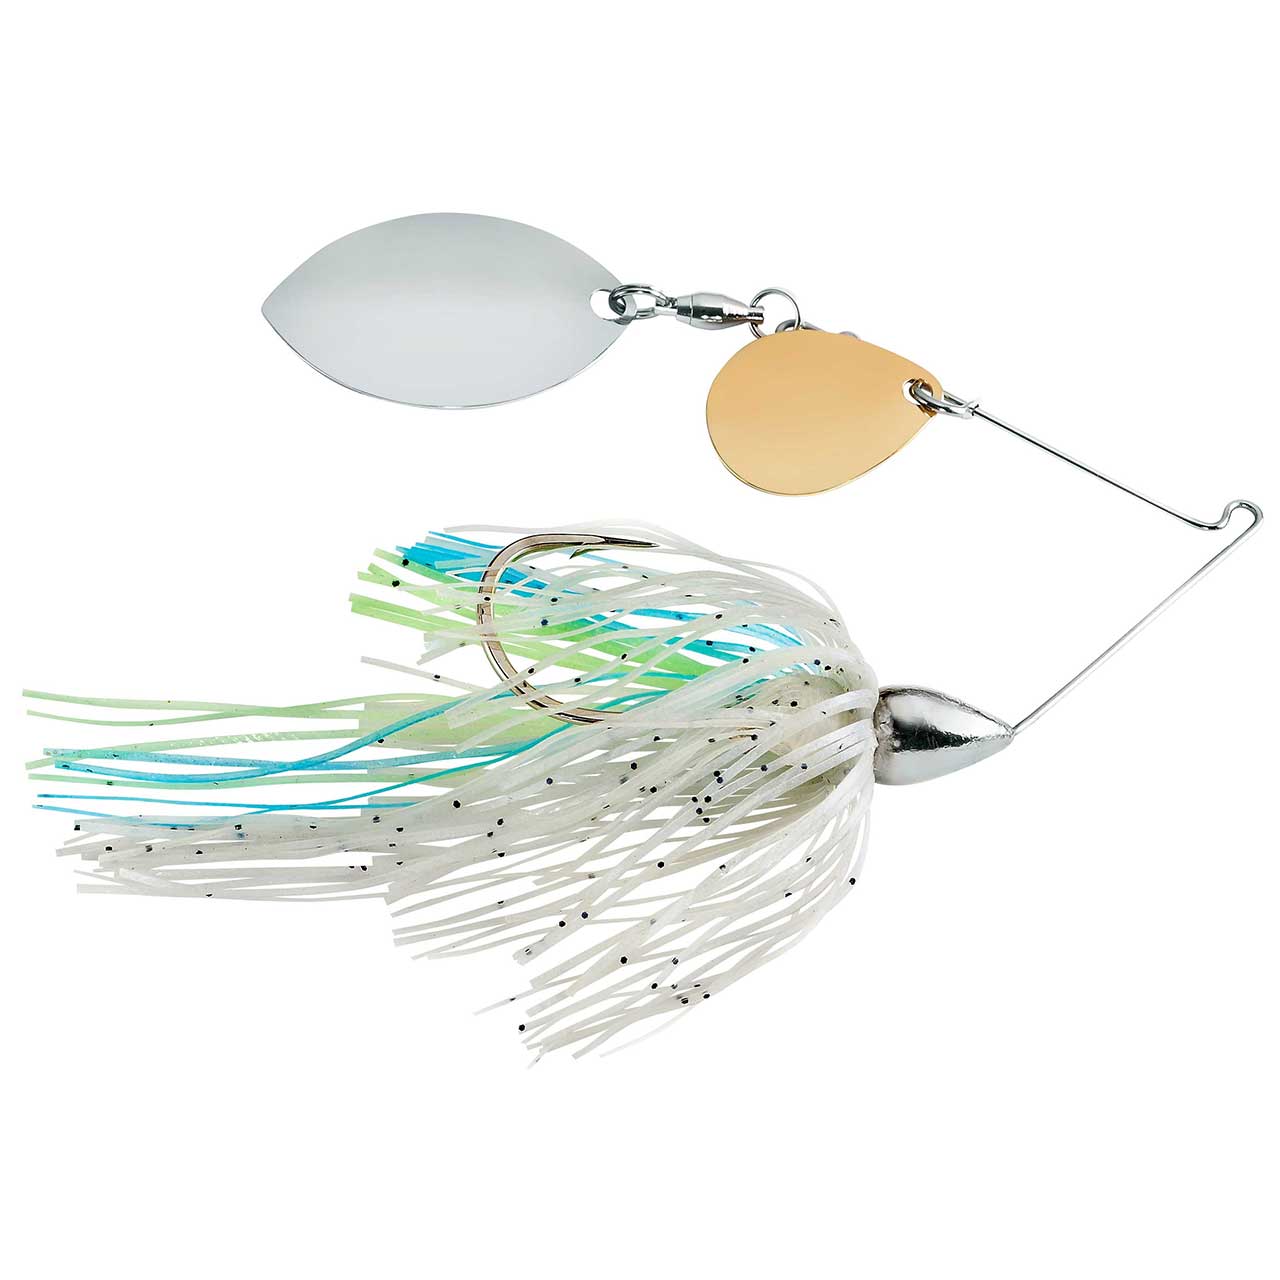 6) War Eagle 1/2 Oz Screamin' Double Willow Blade SpinnerBaits